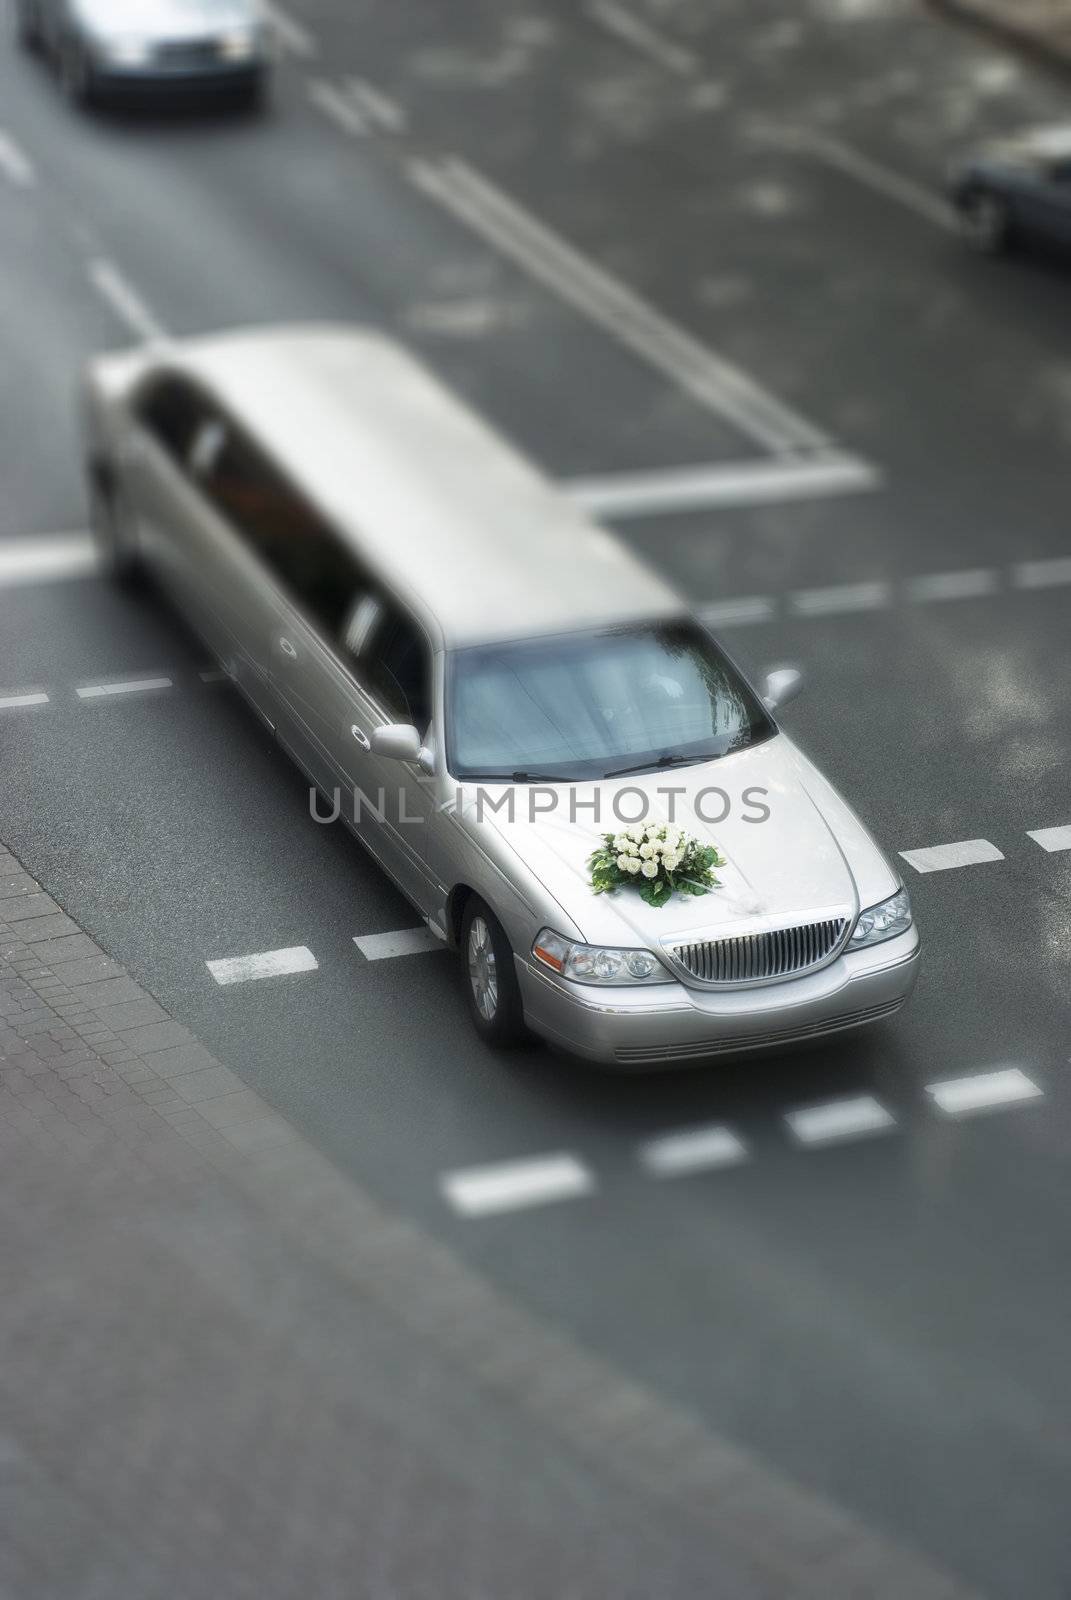 wedding limousine with blured traffic and tilt shift. The streched car has a bouquet on its hood